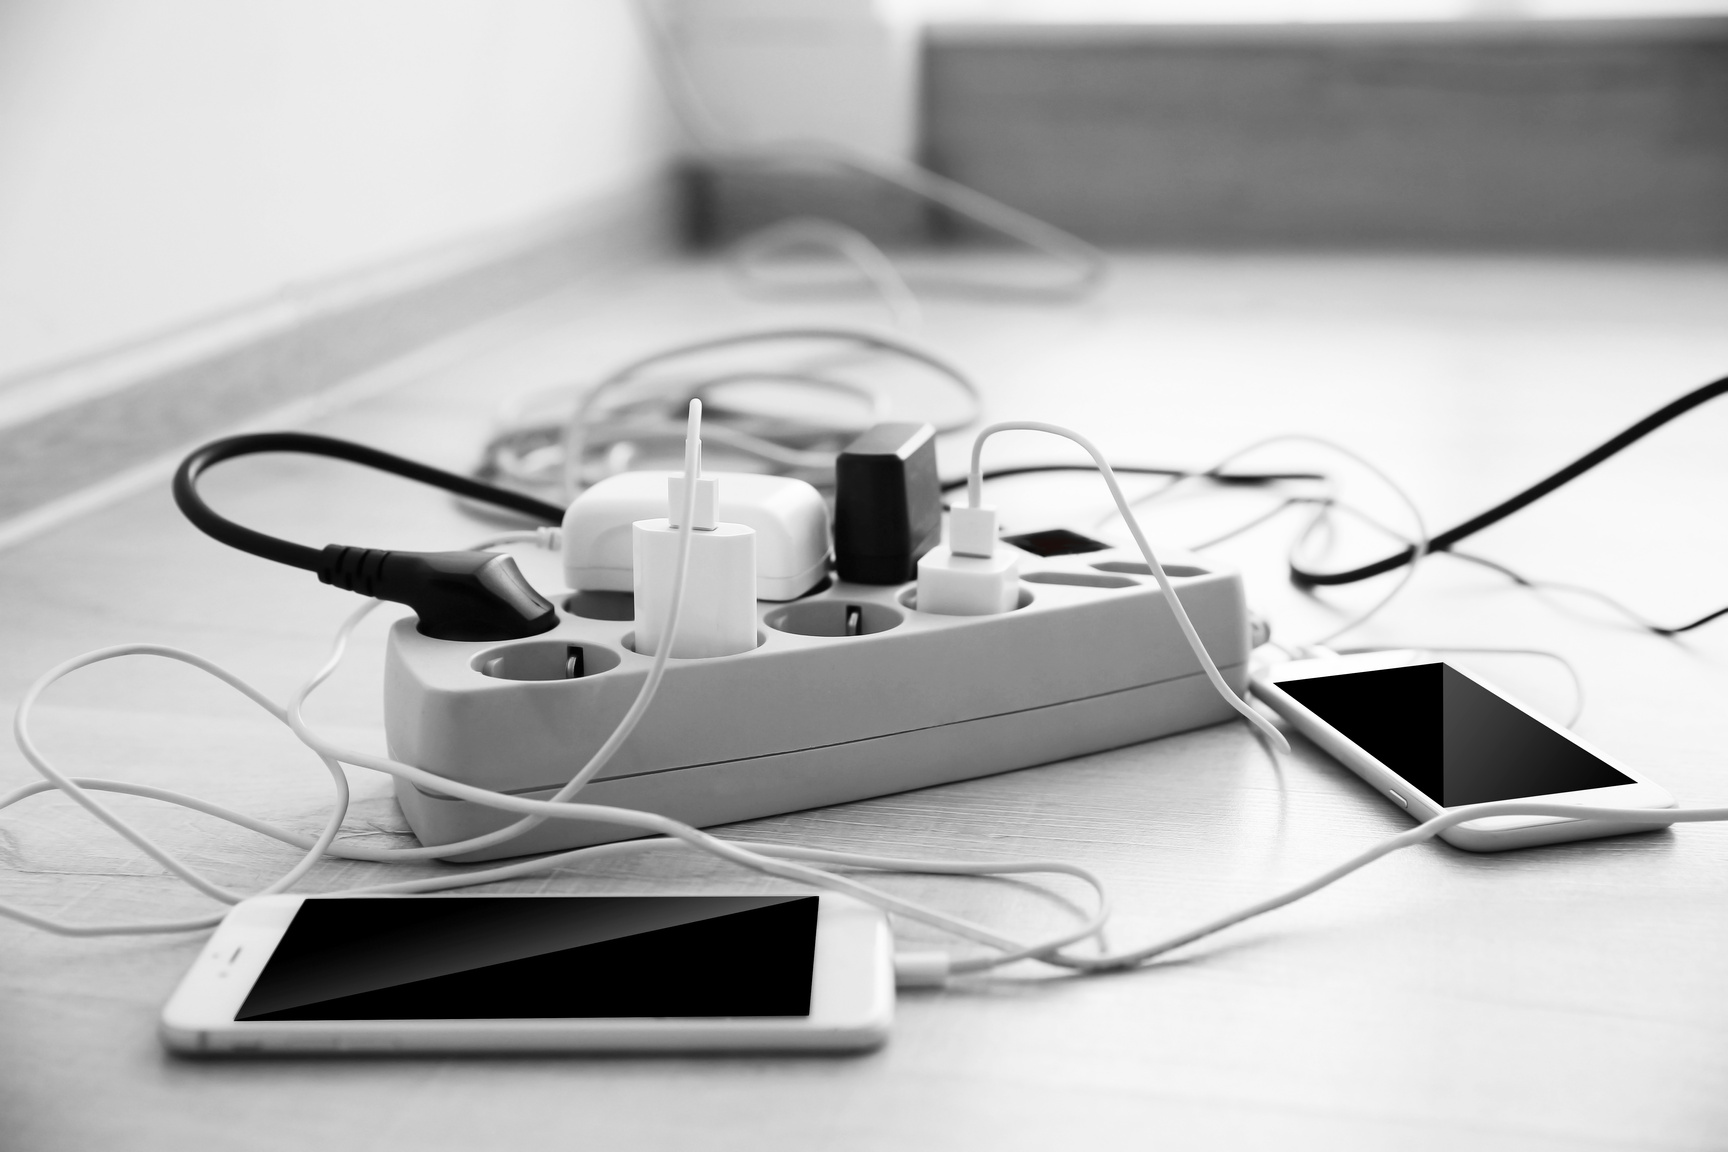 Smartphones Charging on a Power Extension Cord 